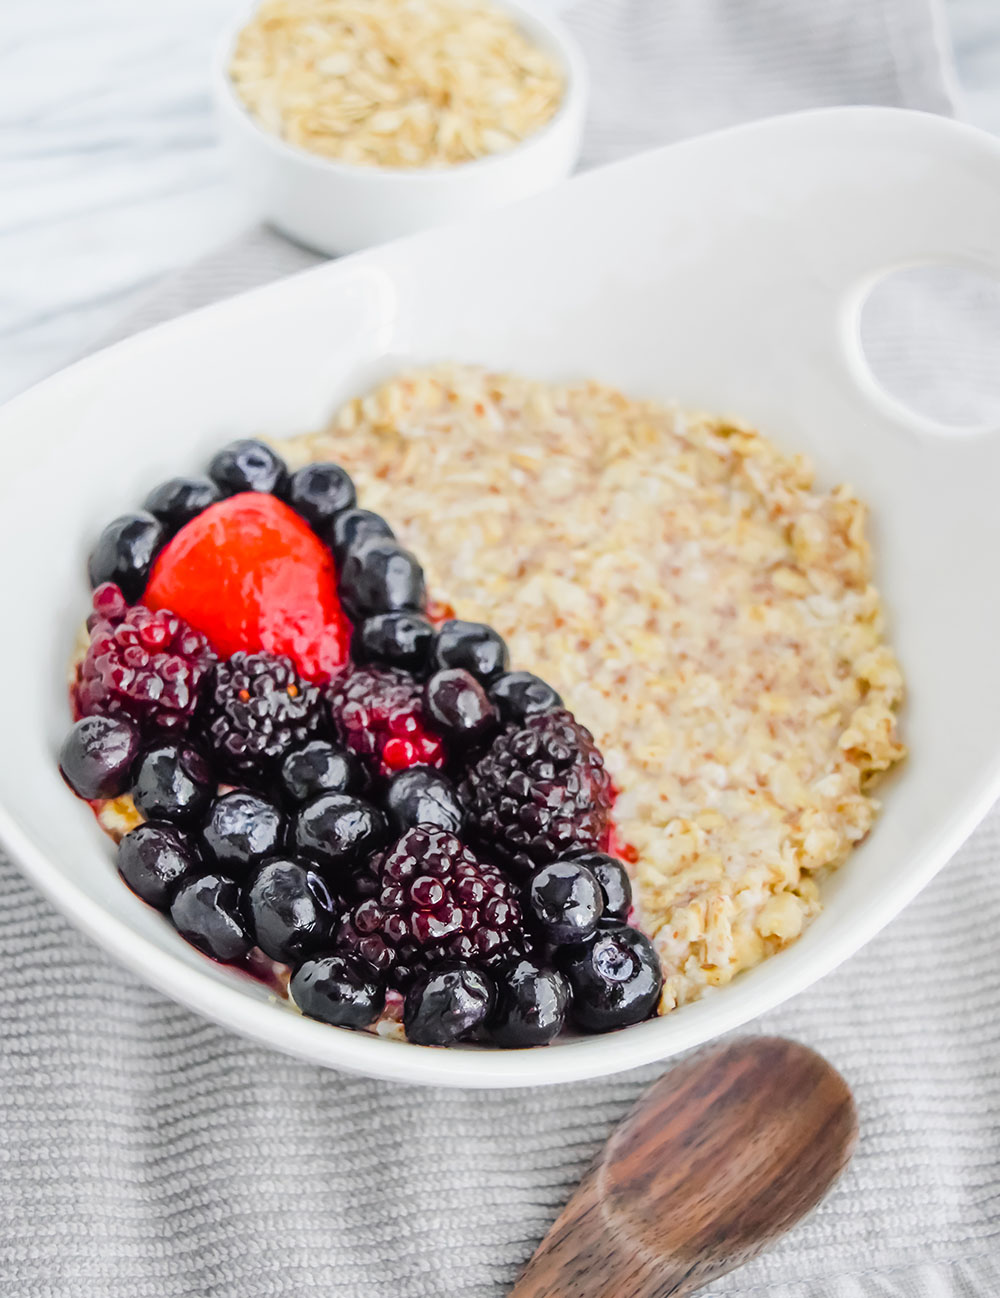 The Best Way to Make Oatmeal